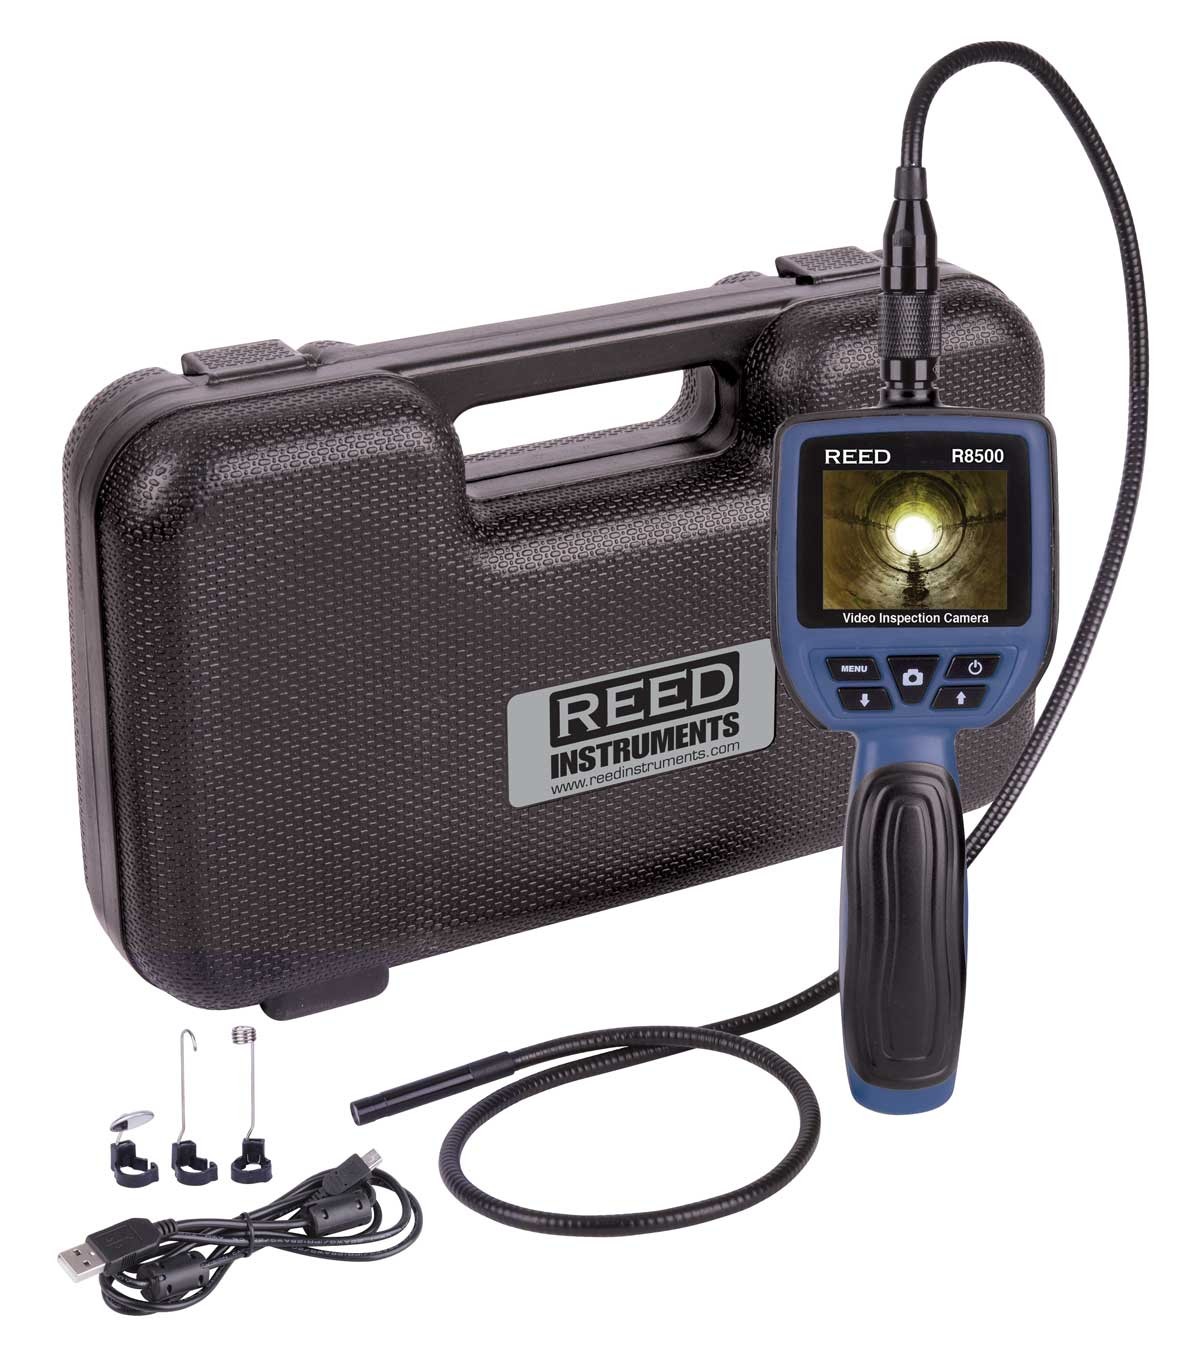 Reed R8500 9mm Video Inspection Camera Recordable Reed R8500 3